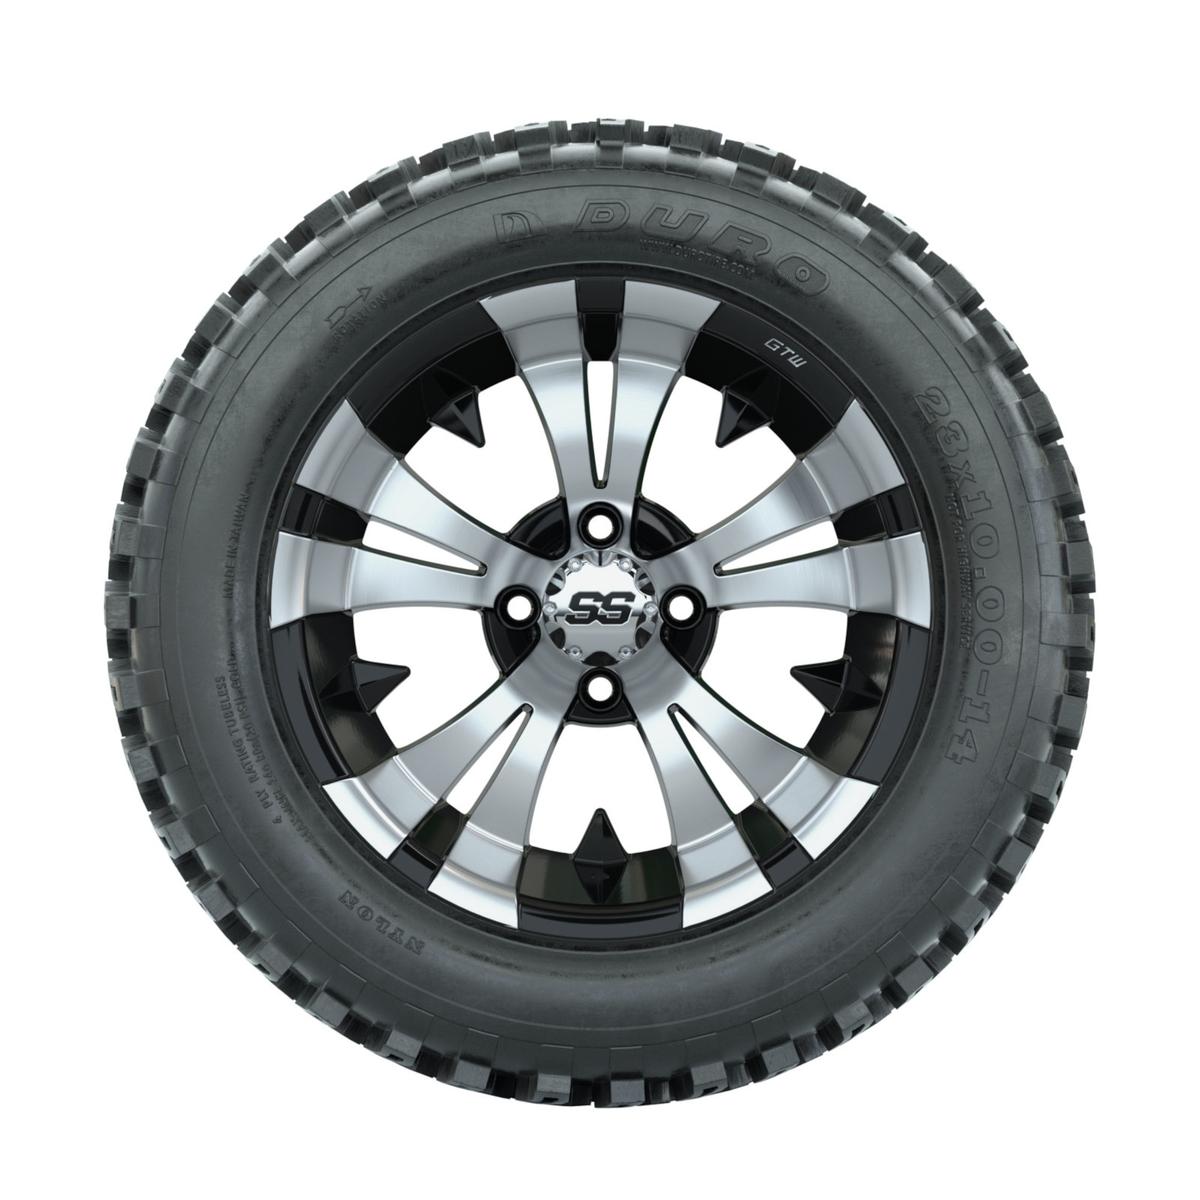 14” GTW Vampire Wheels with Duro Desert A-T Tires – Set of 4